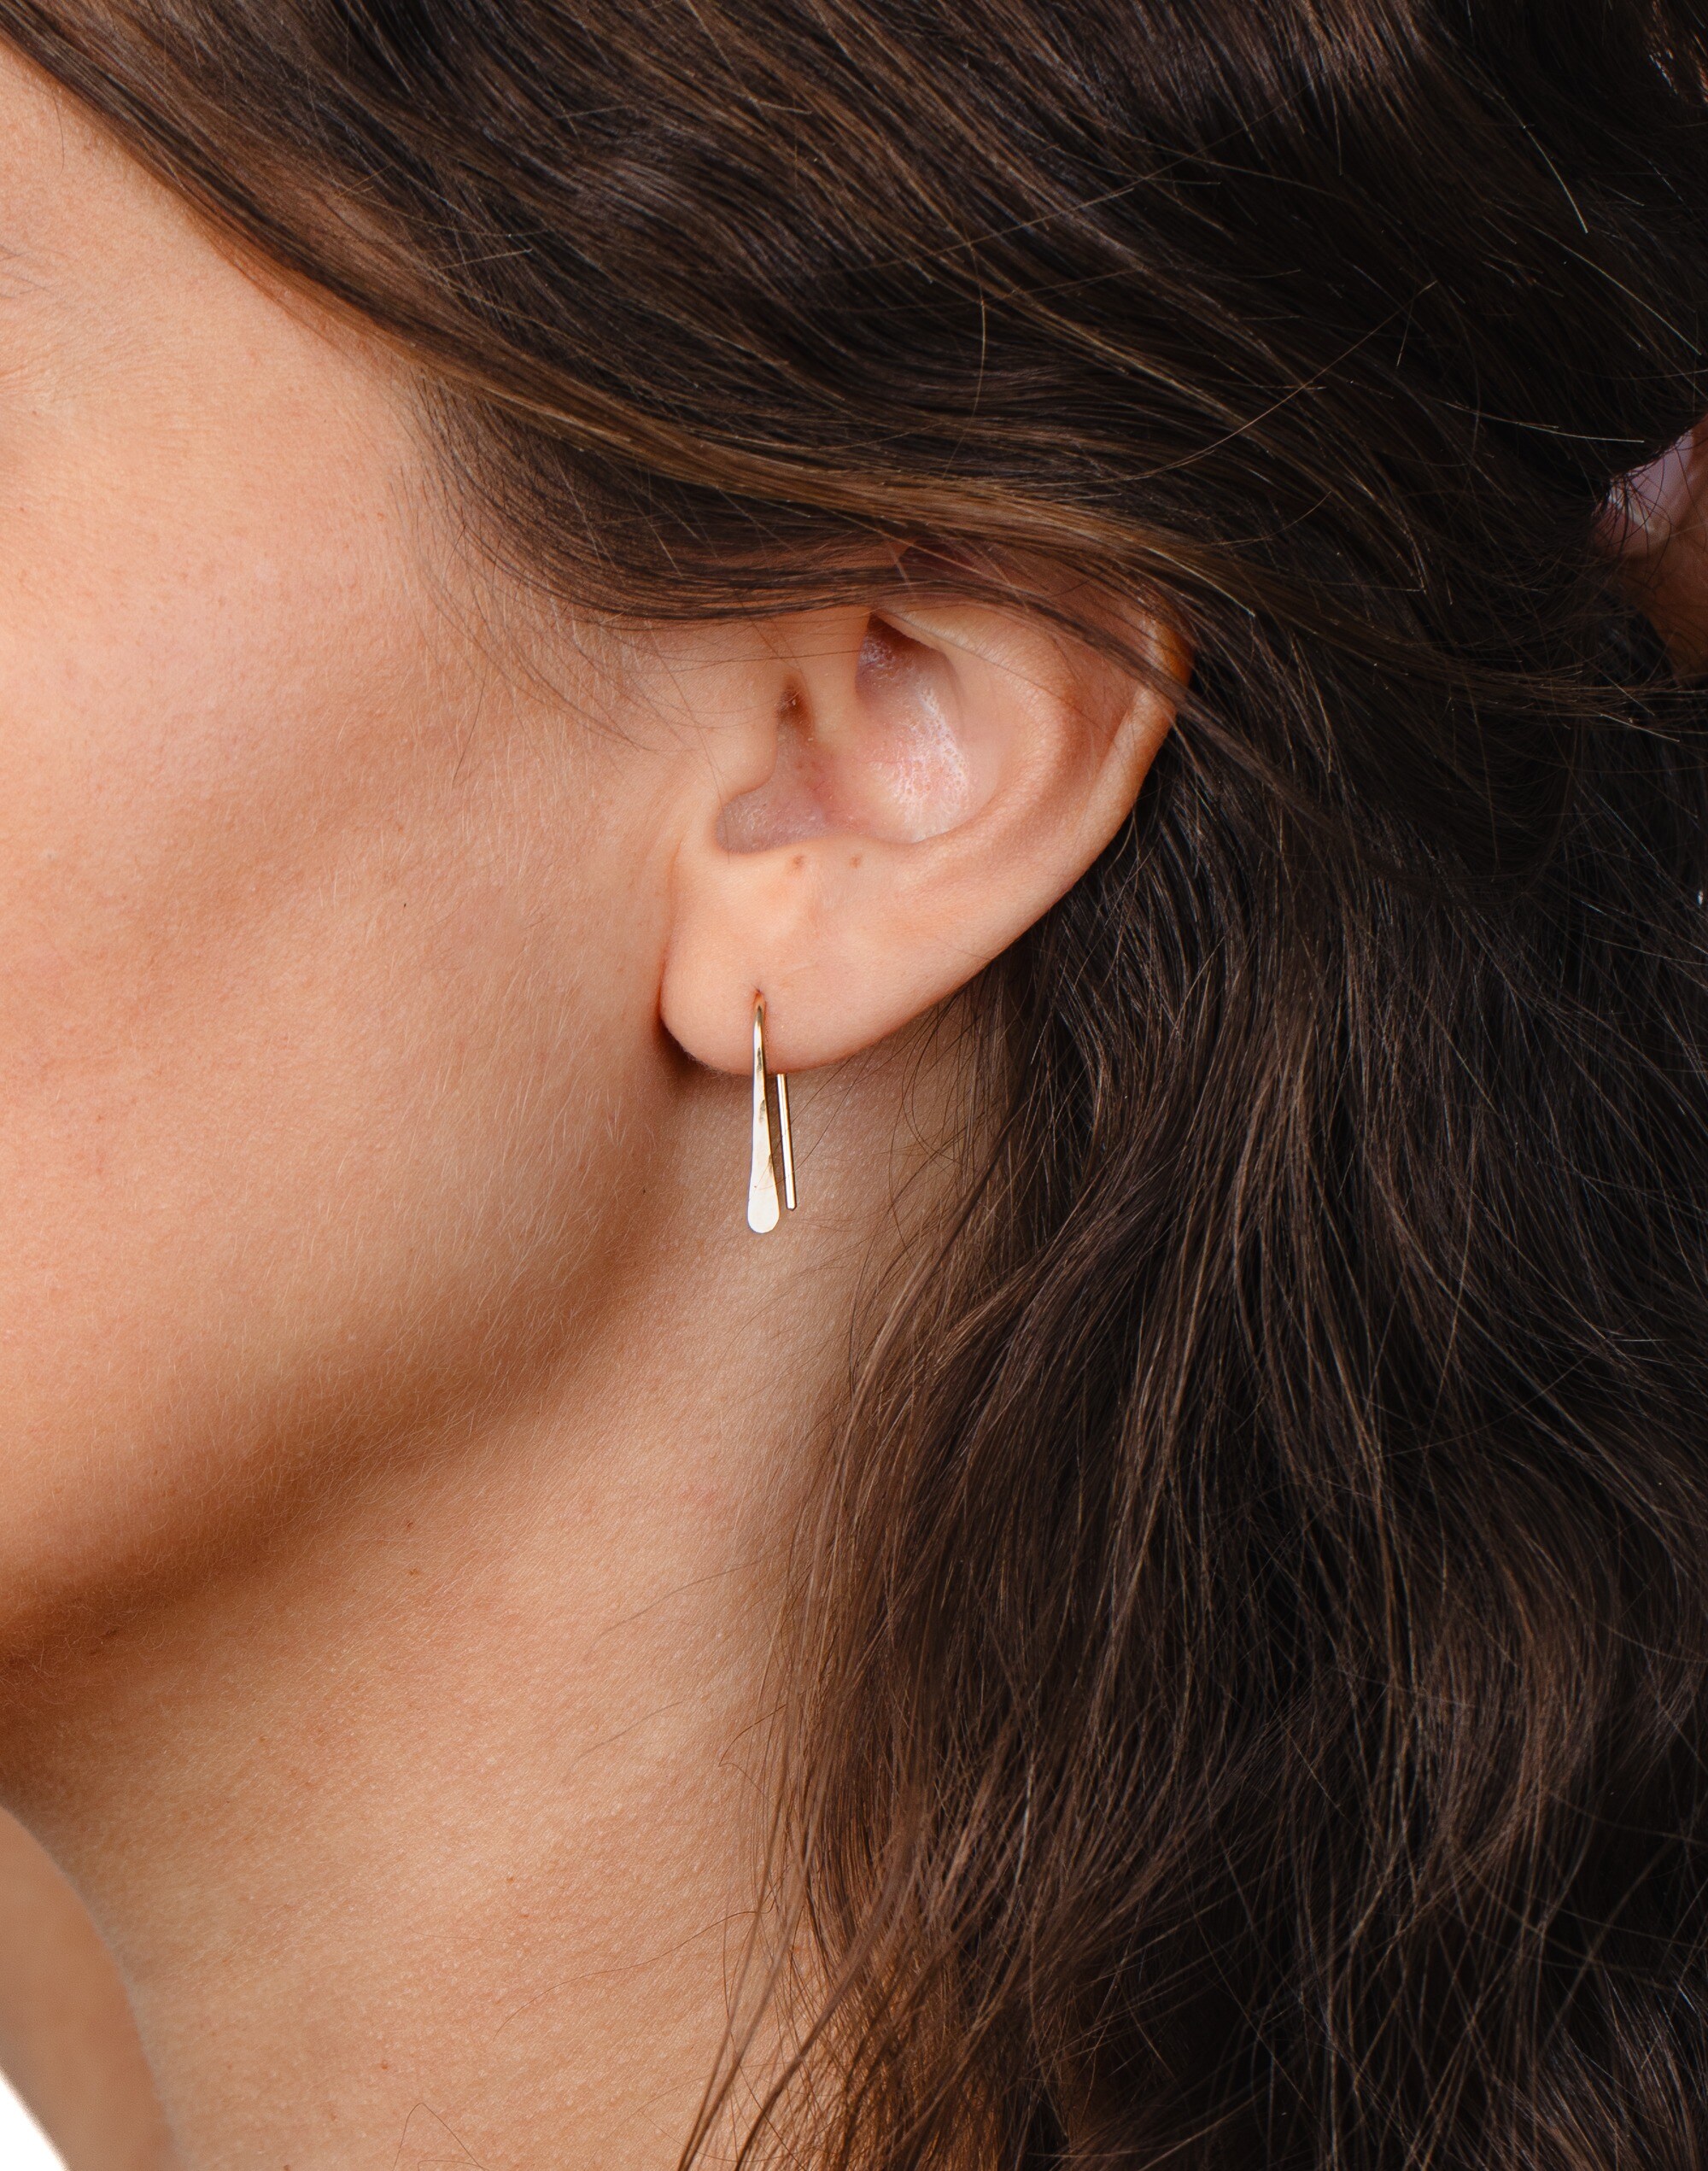 In Situ Jewelry 14k Gold-Filled Quill Threader Earrings